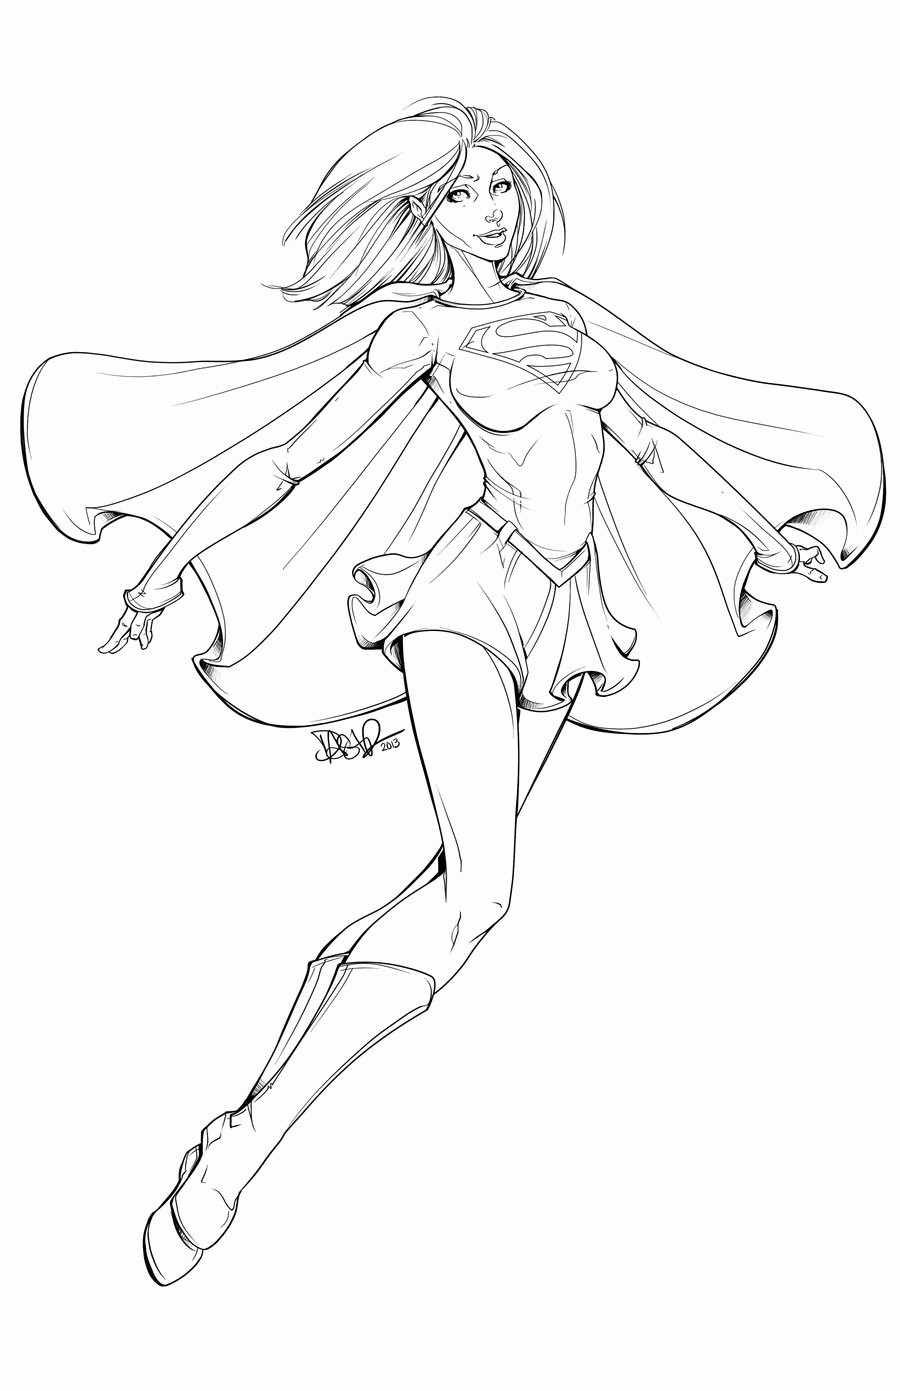 Free Supergirl Coloring Pages
 Coloring Pages Supergirl AZ Coloring Pages